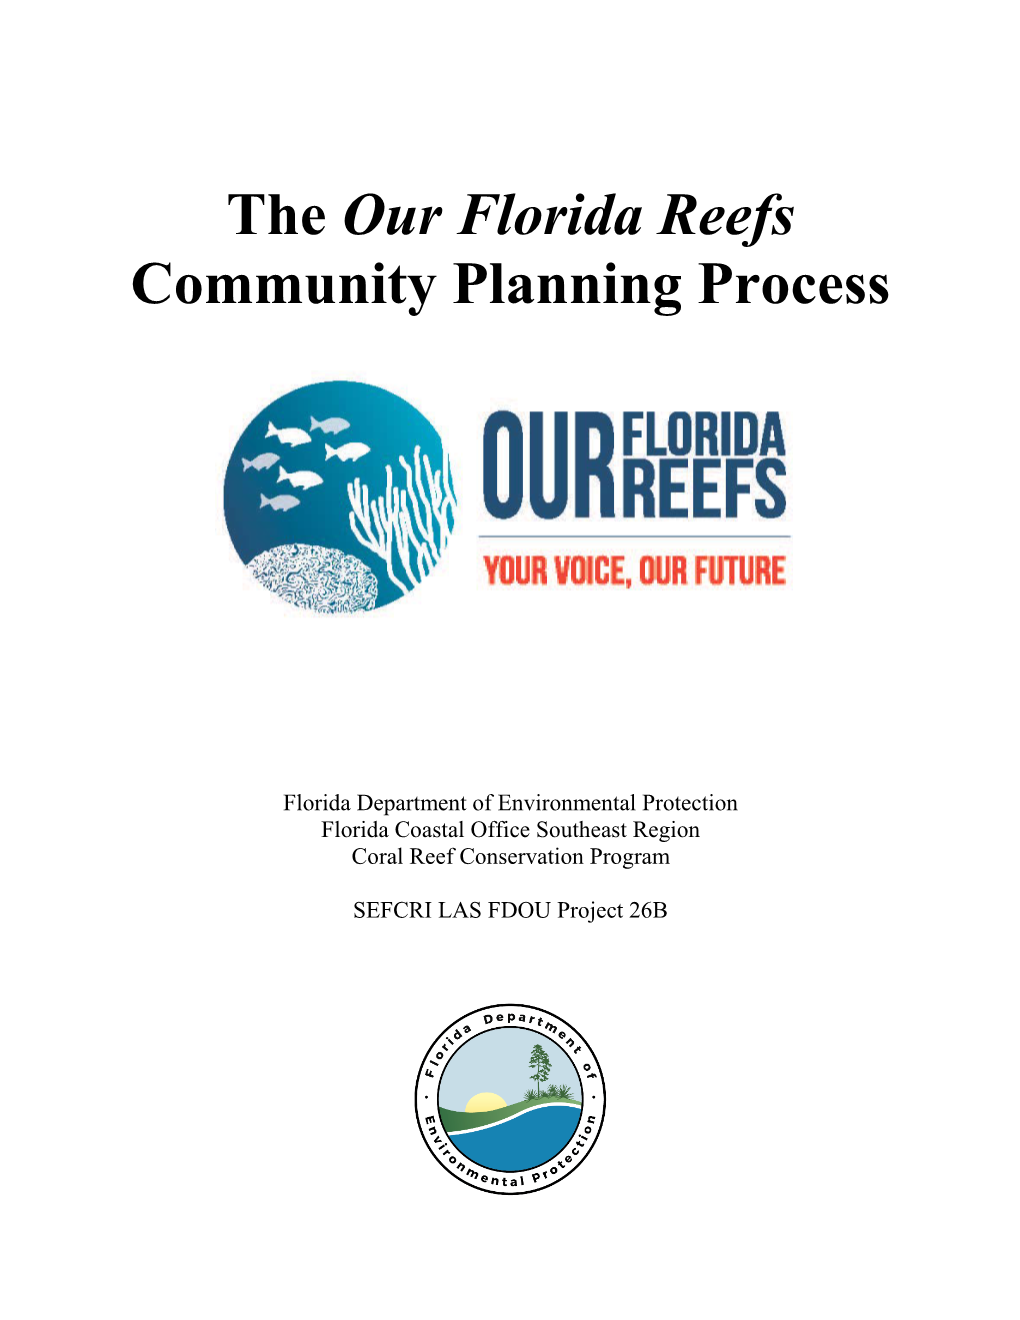 The "Our Florida Reefs" Community Planning Process